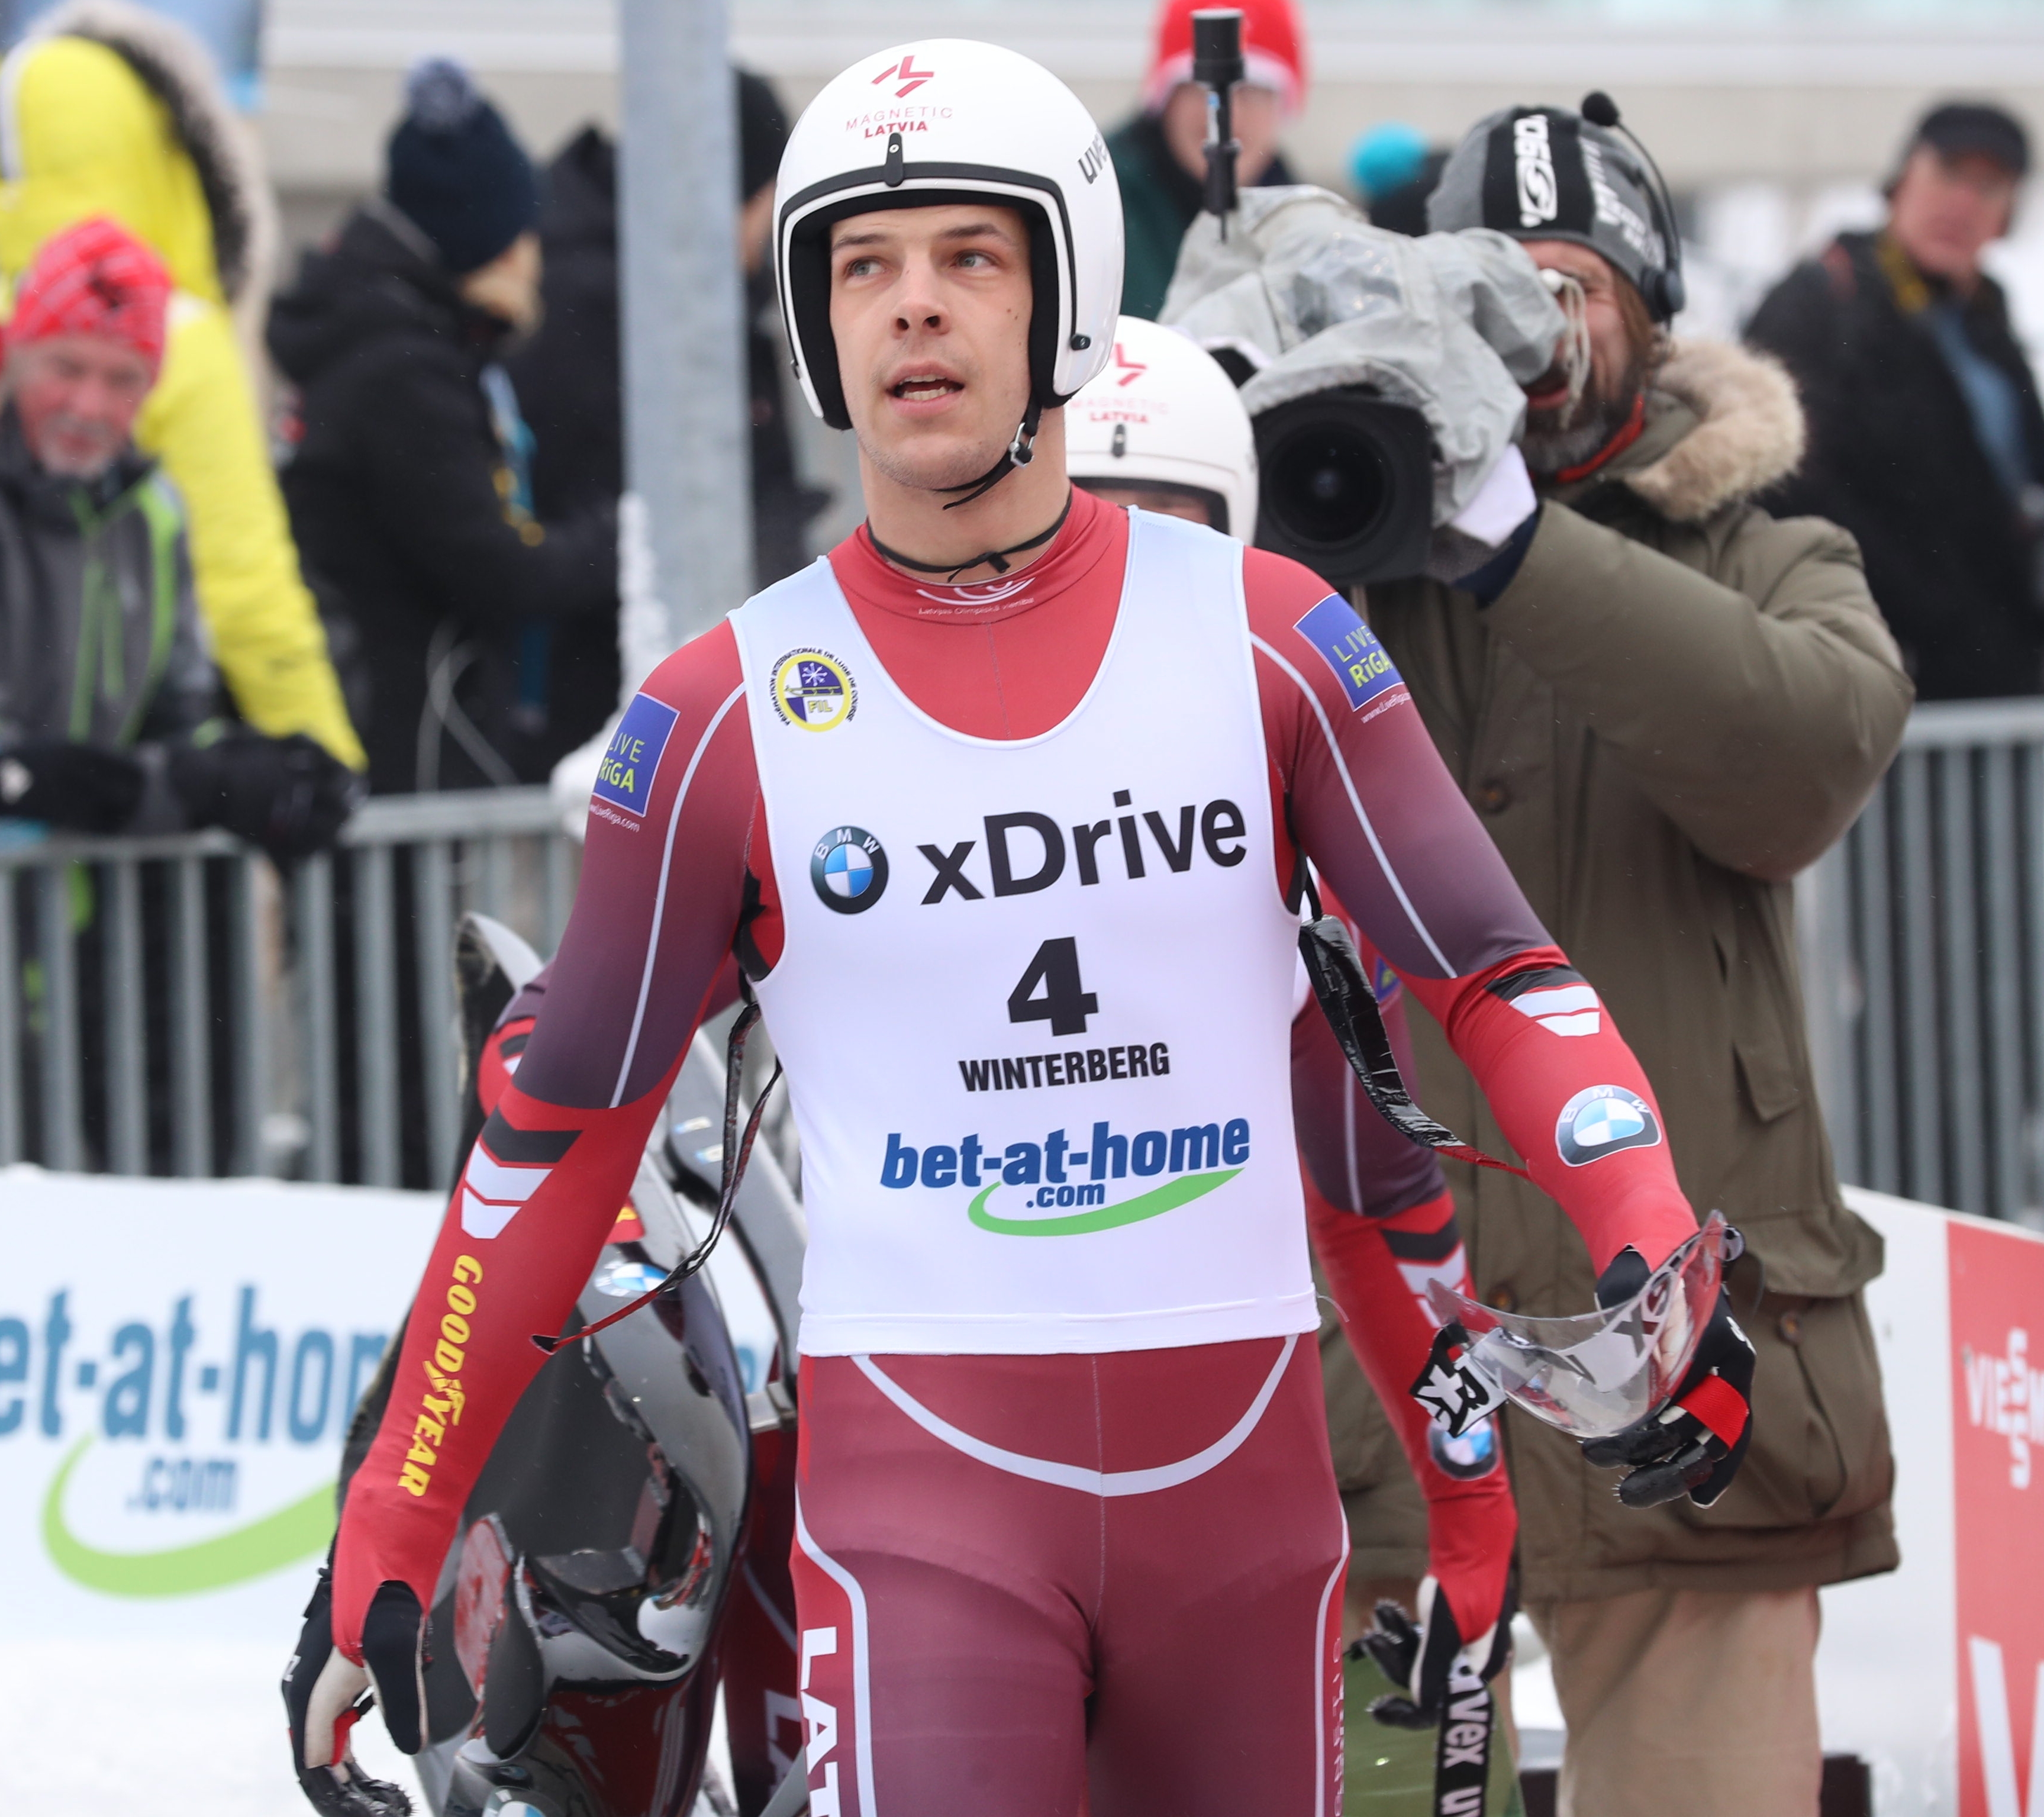 File:2019-01-25 Doubles Sprint at FIL World Luge Championships 2019 by Sandro Halank-024.jpg - Wikimedia Commons